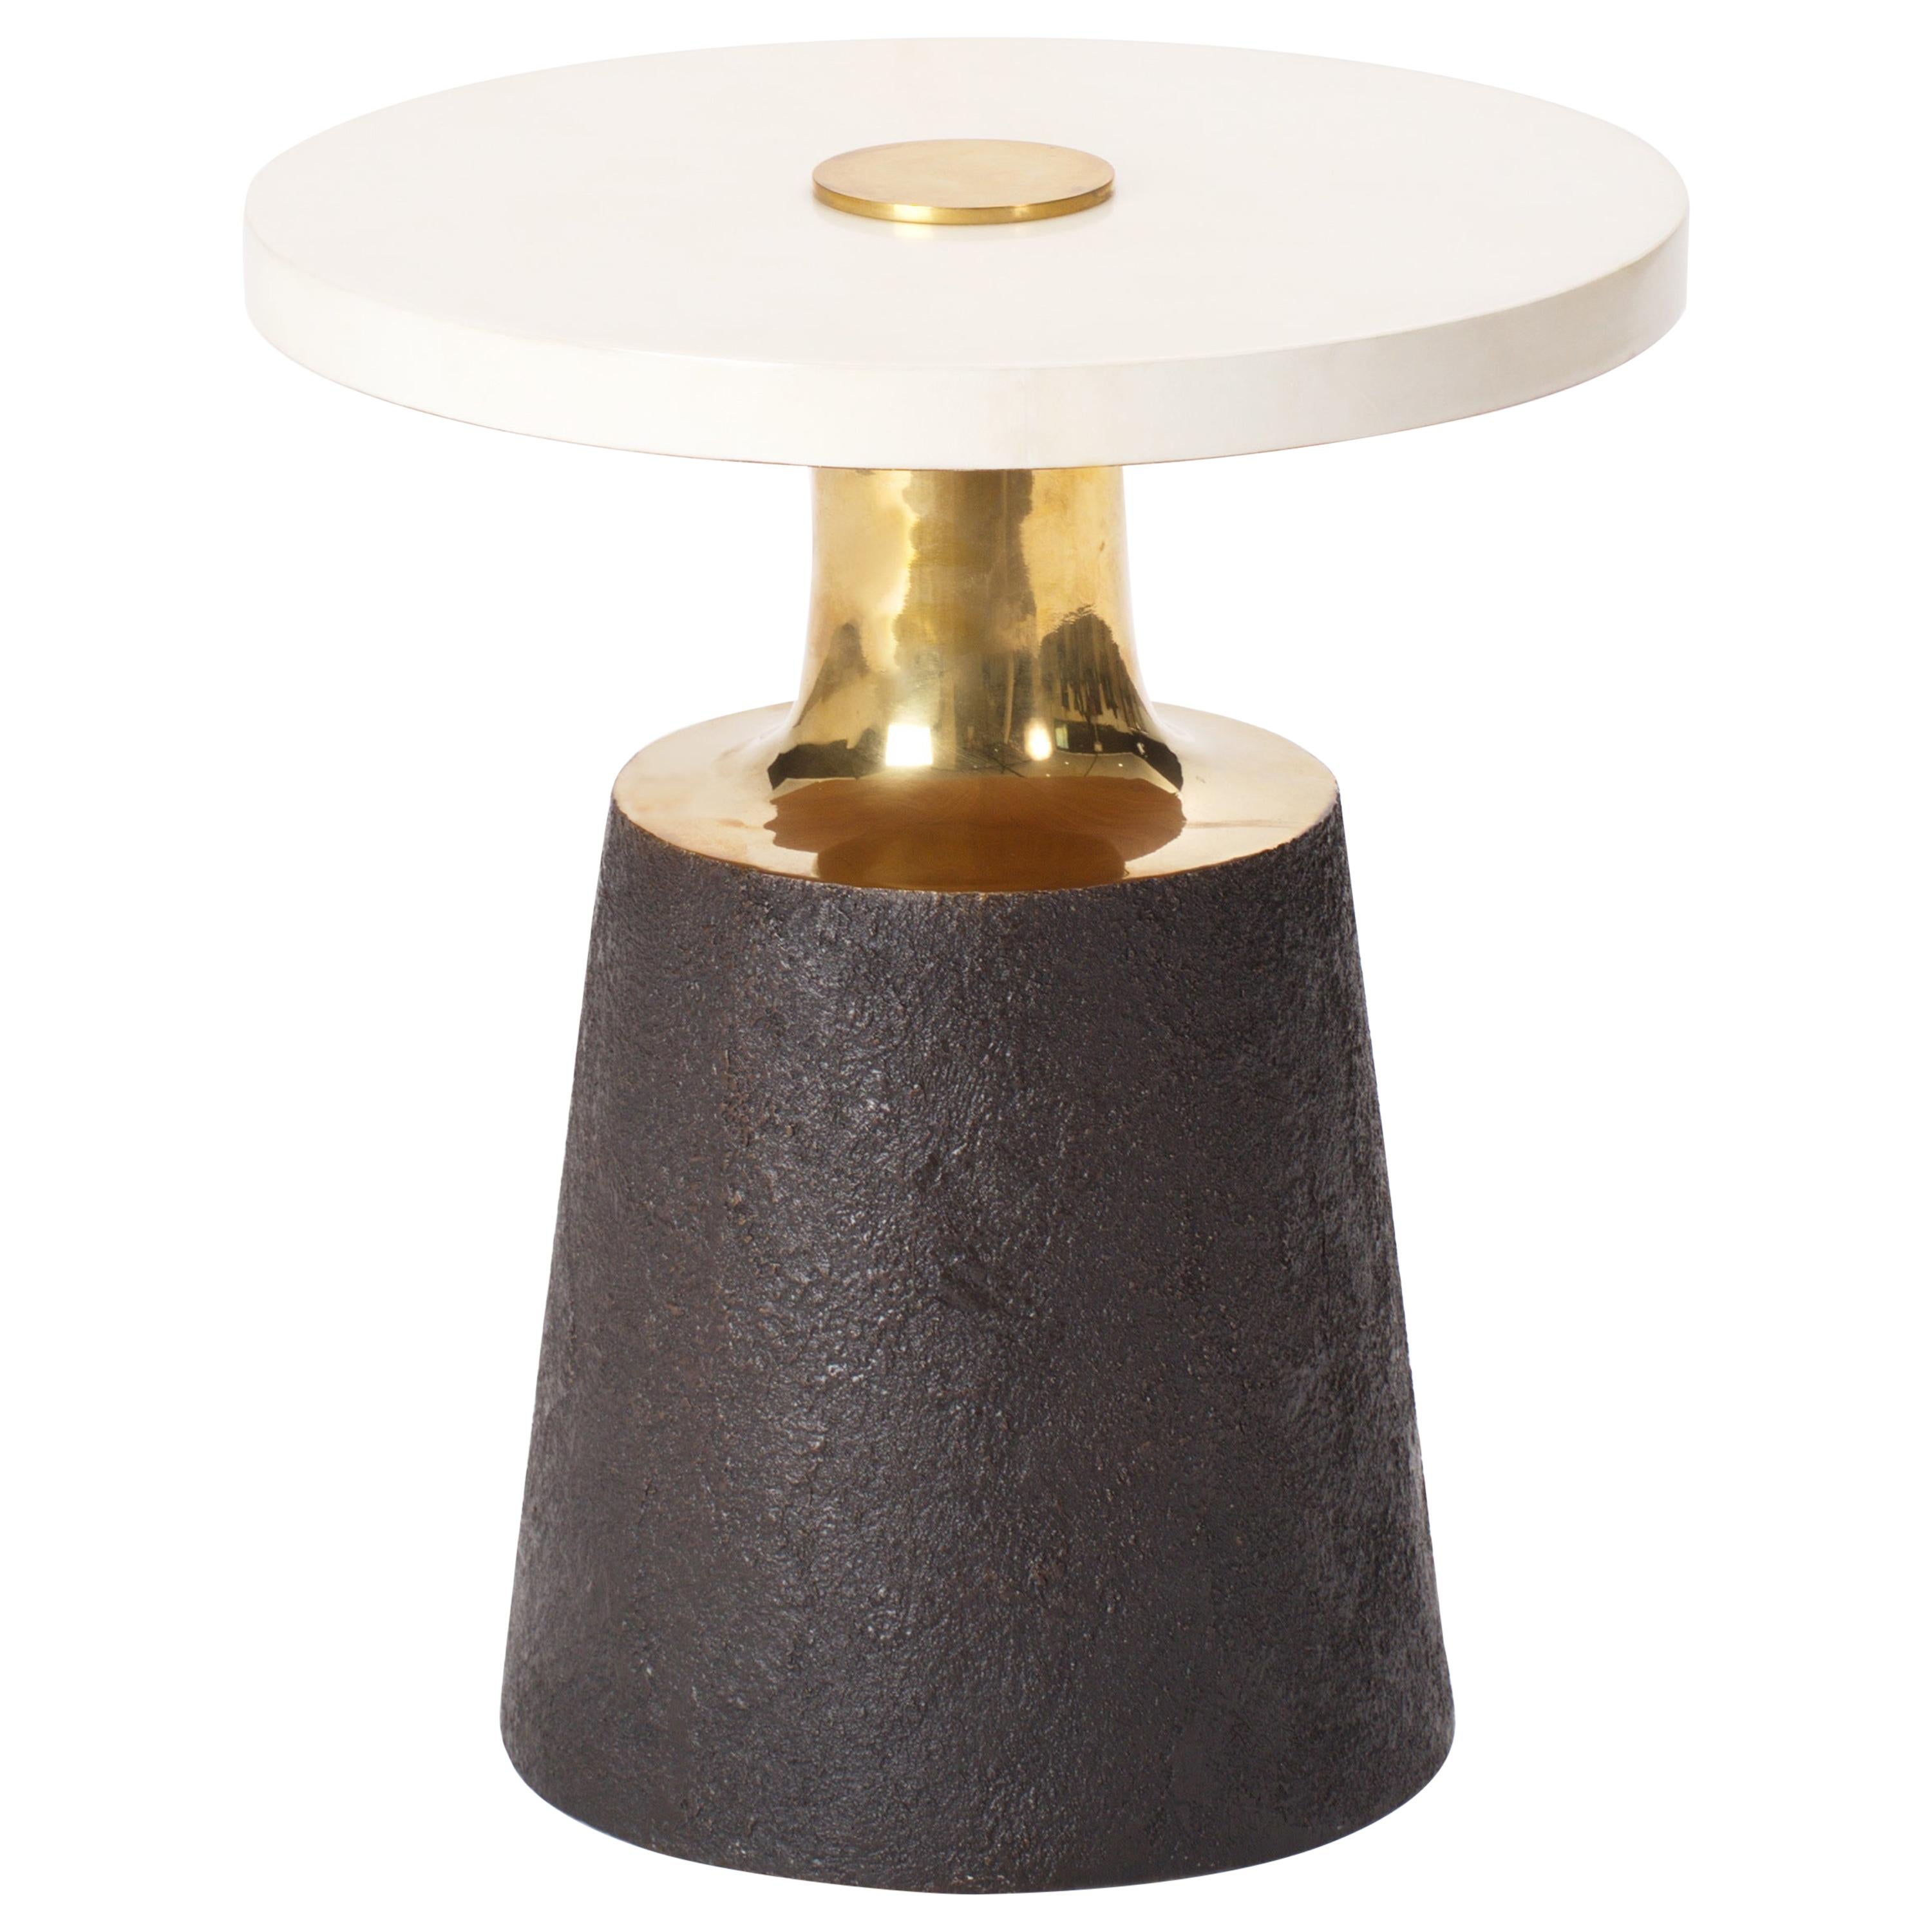 Bronze Necked Side Table with Parchment Top by Elan Atelier